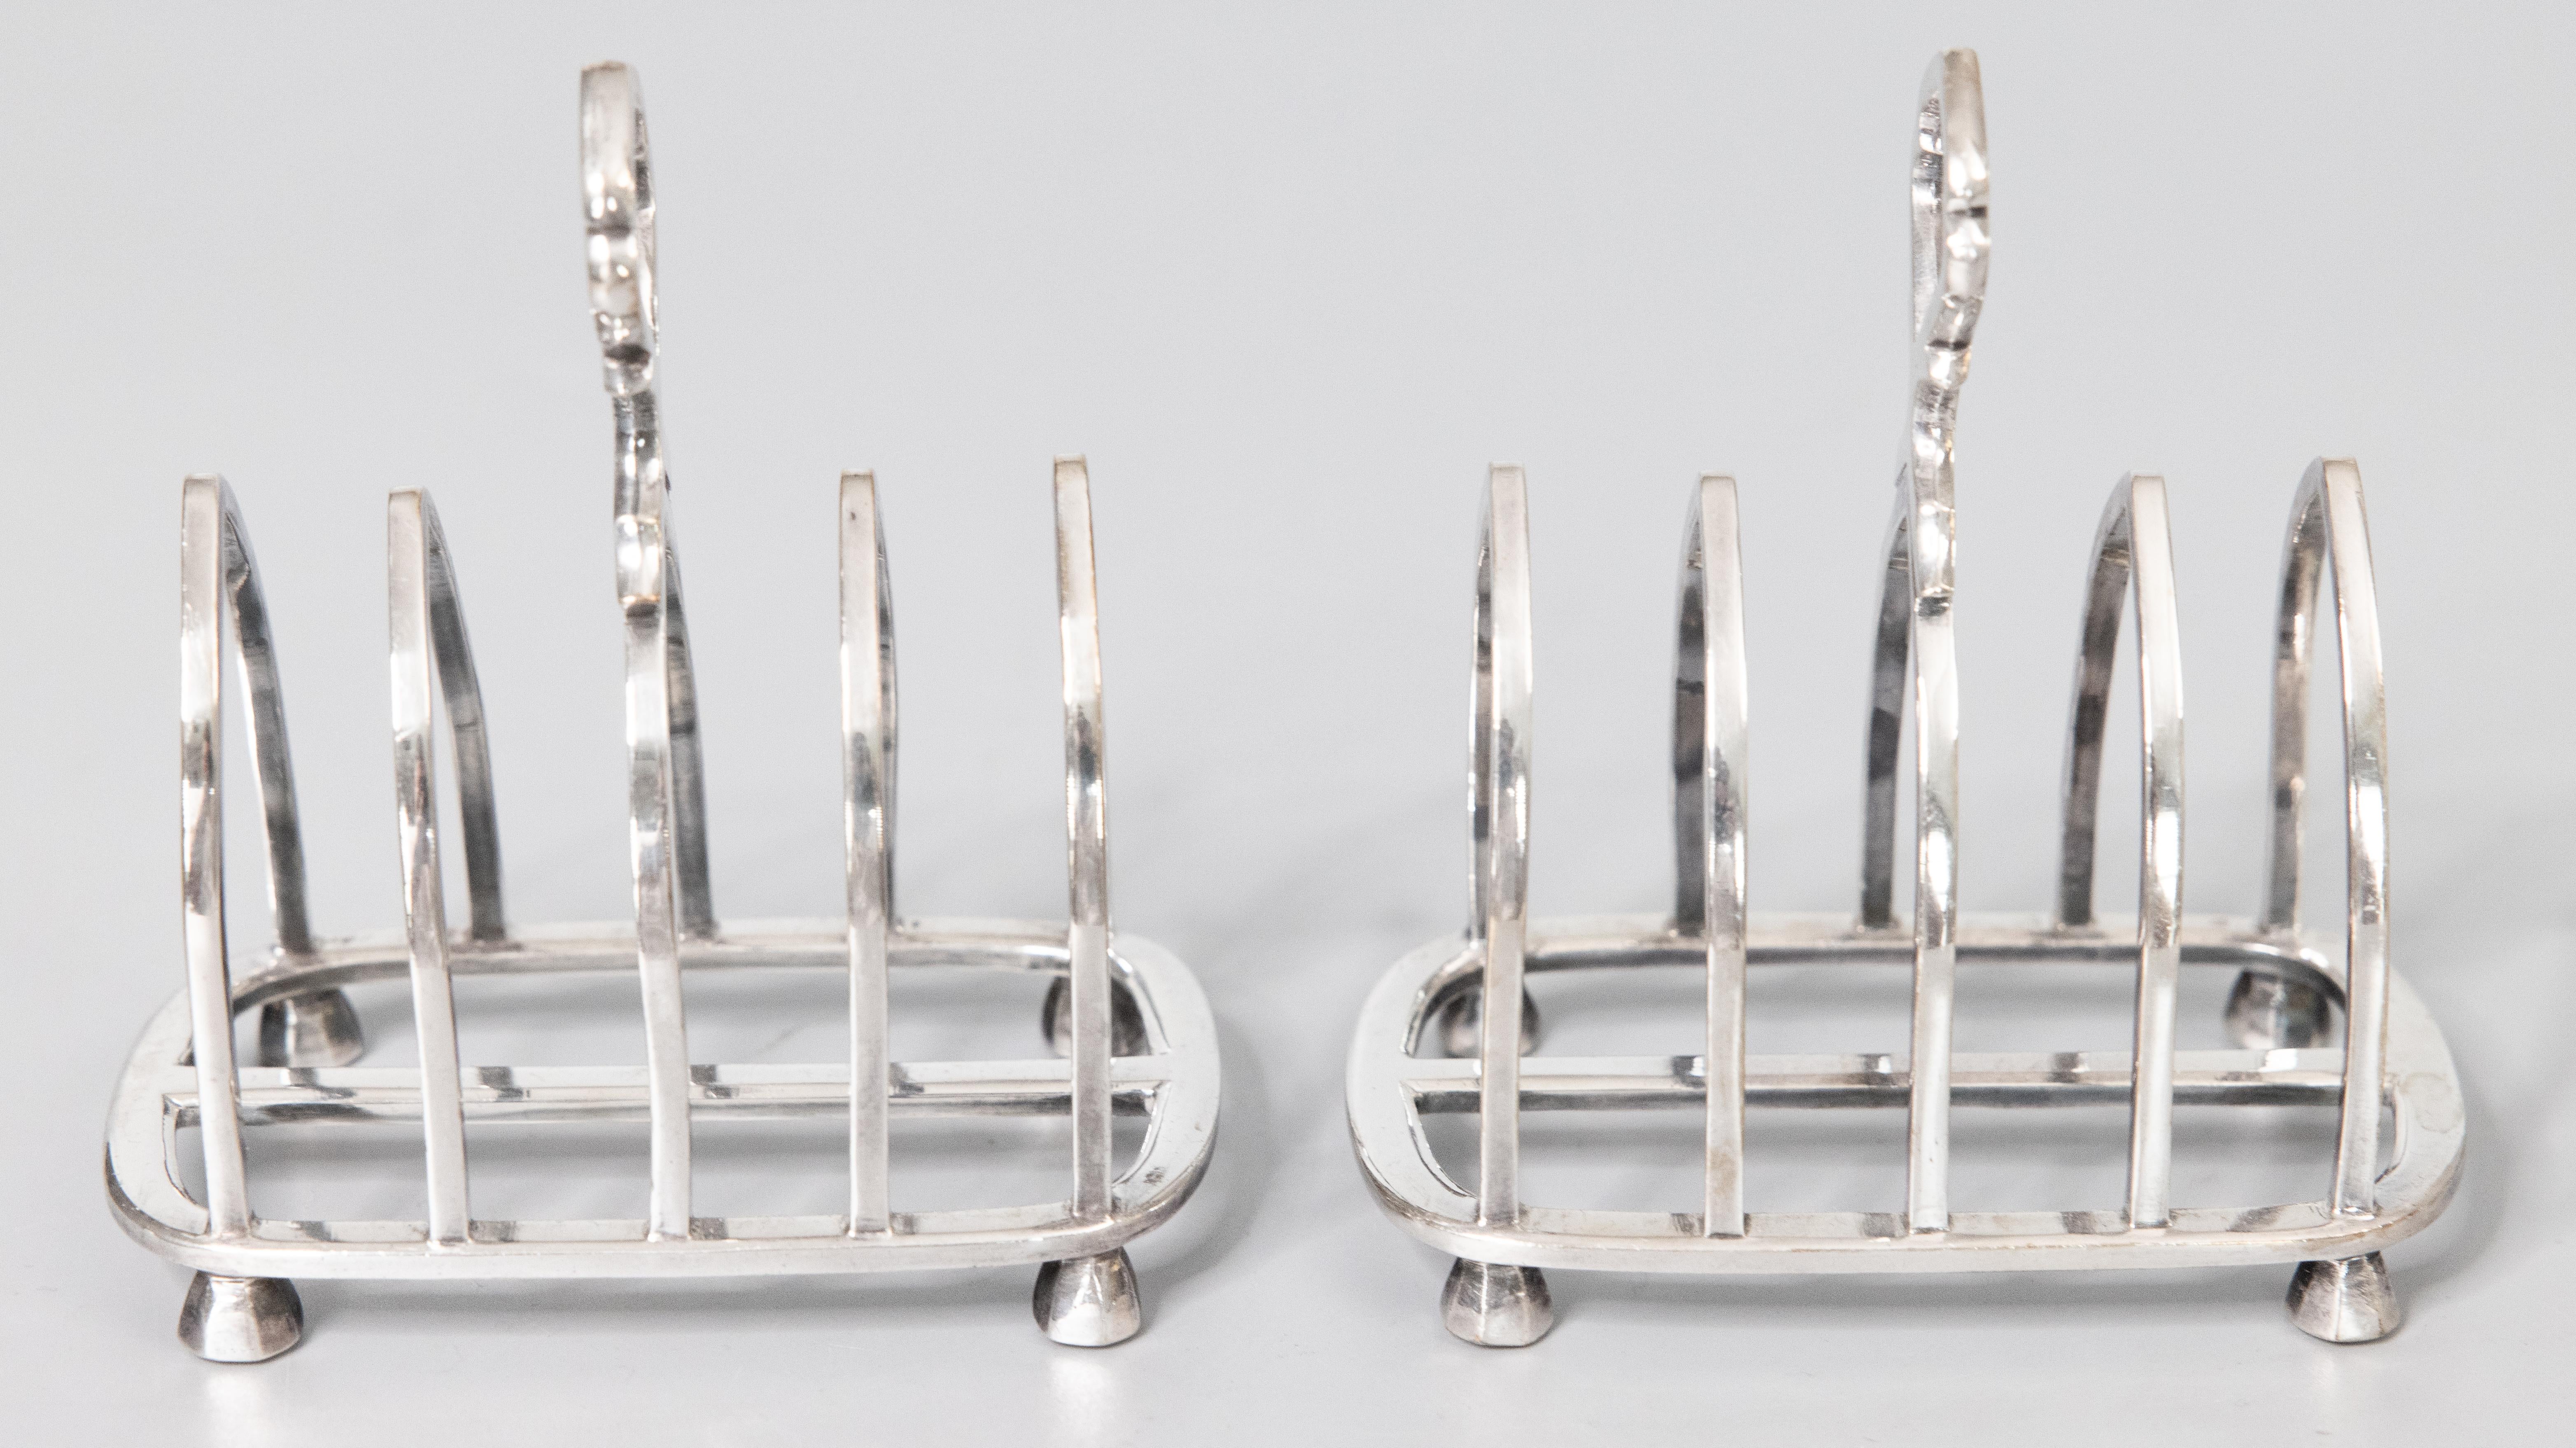 A superb pair of antique English silverplated toast racks, dated 1923. Maker's mark and hallmarks on reverse. These fine quality silver toast racks are well made with a lovely Gothic shape, decorative finial, and charming feet. They would be